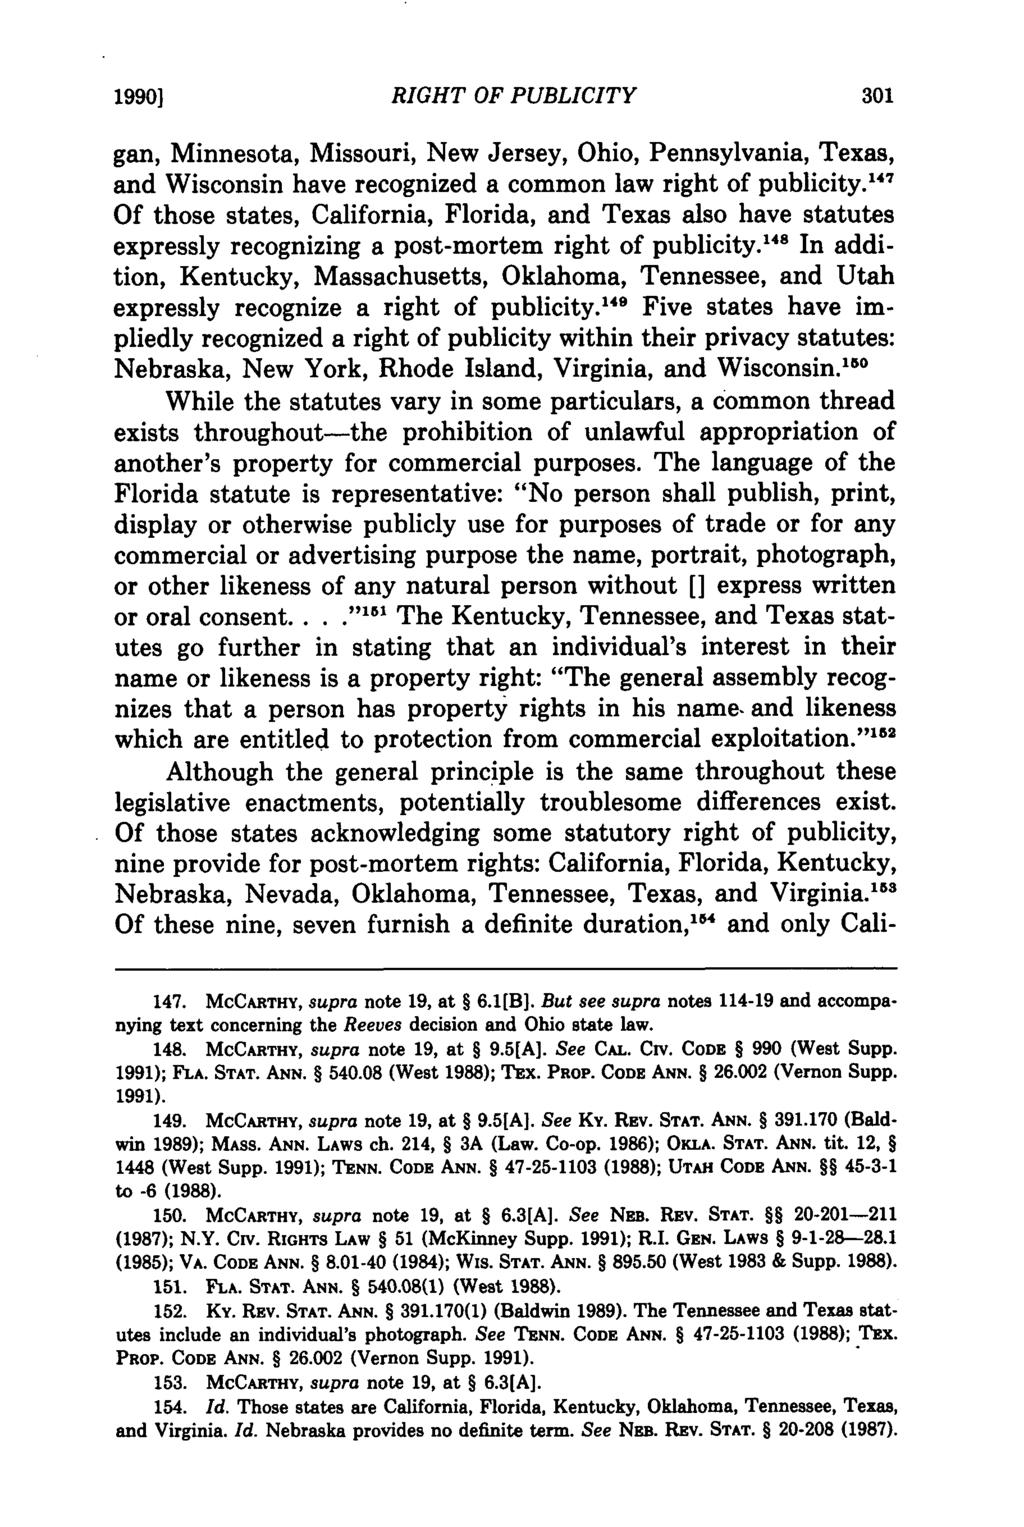 1990] Neumeyer: The Right of Publicity and its Descendibility RIGHT OF PUBLICITY gan, Minnesota, Missouri, New Jersey, Ohio, Pennsylvania, Texas, and Wisconsin have recognized a common law right of